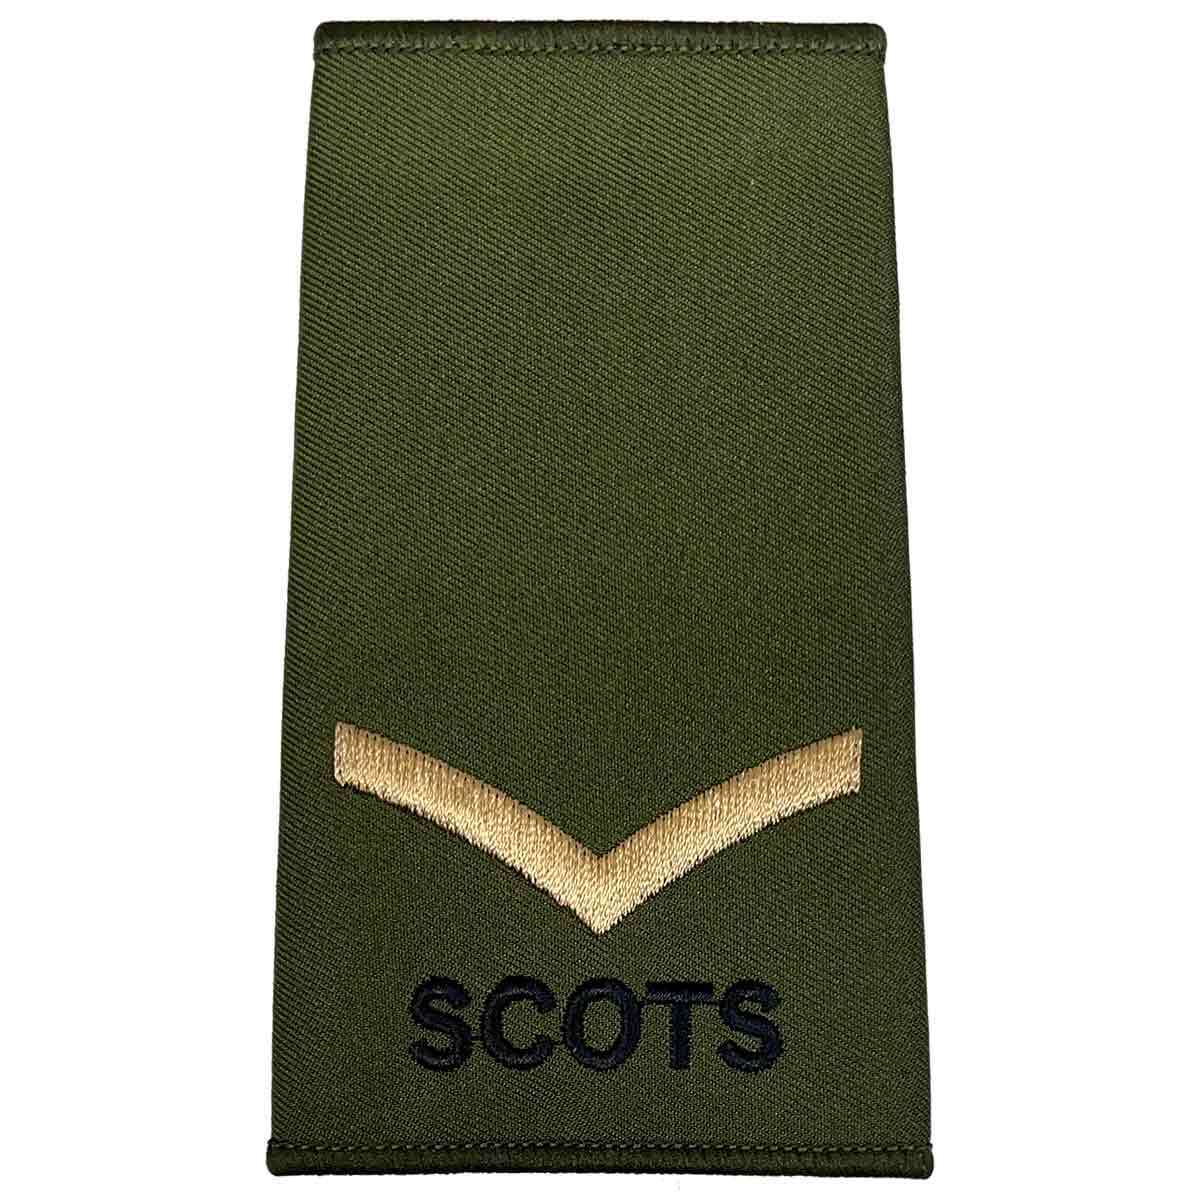 Royal Regiment of Scotland (SCOTS) Olive Rank Slide (PAIR) Gold Embroidery 